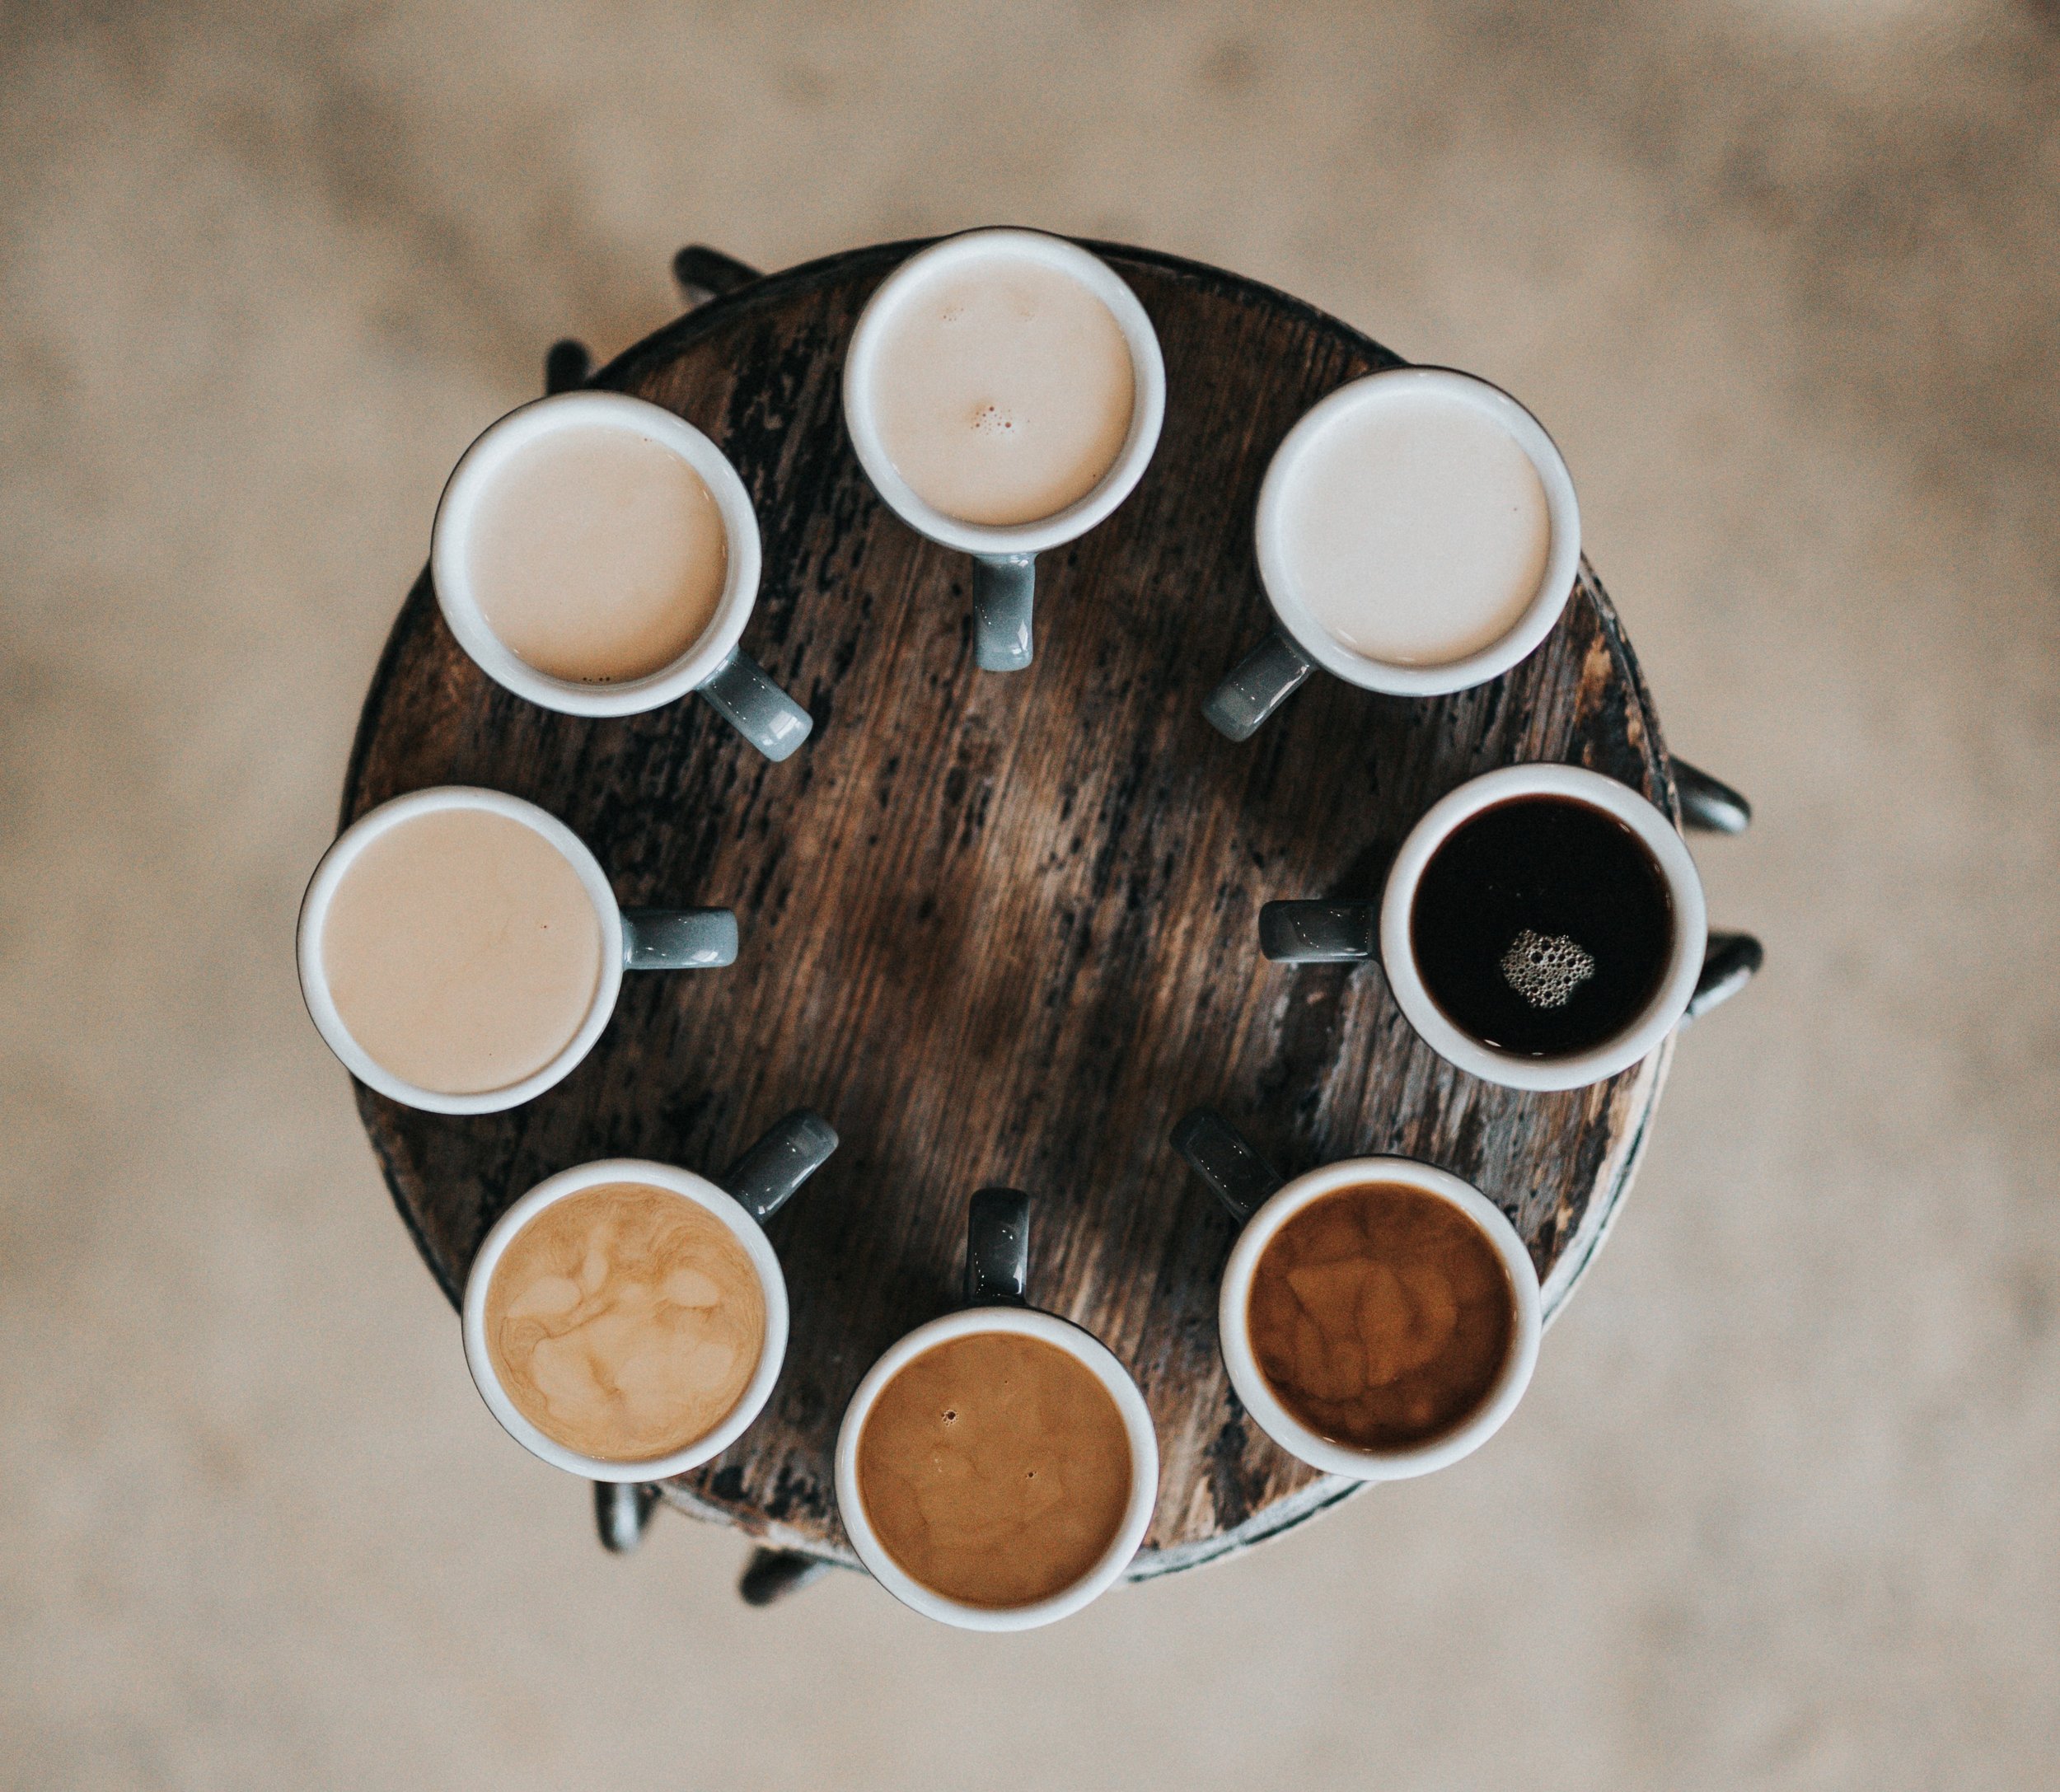 15 Facts That Make Coffee Cooler! — Rise Cafe Denver